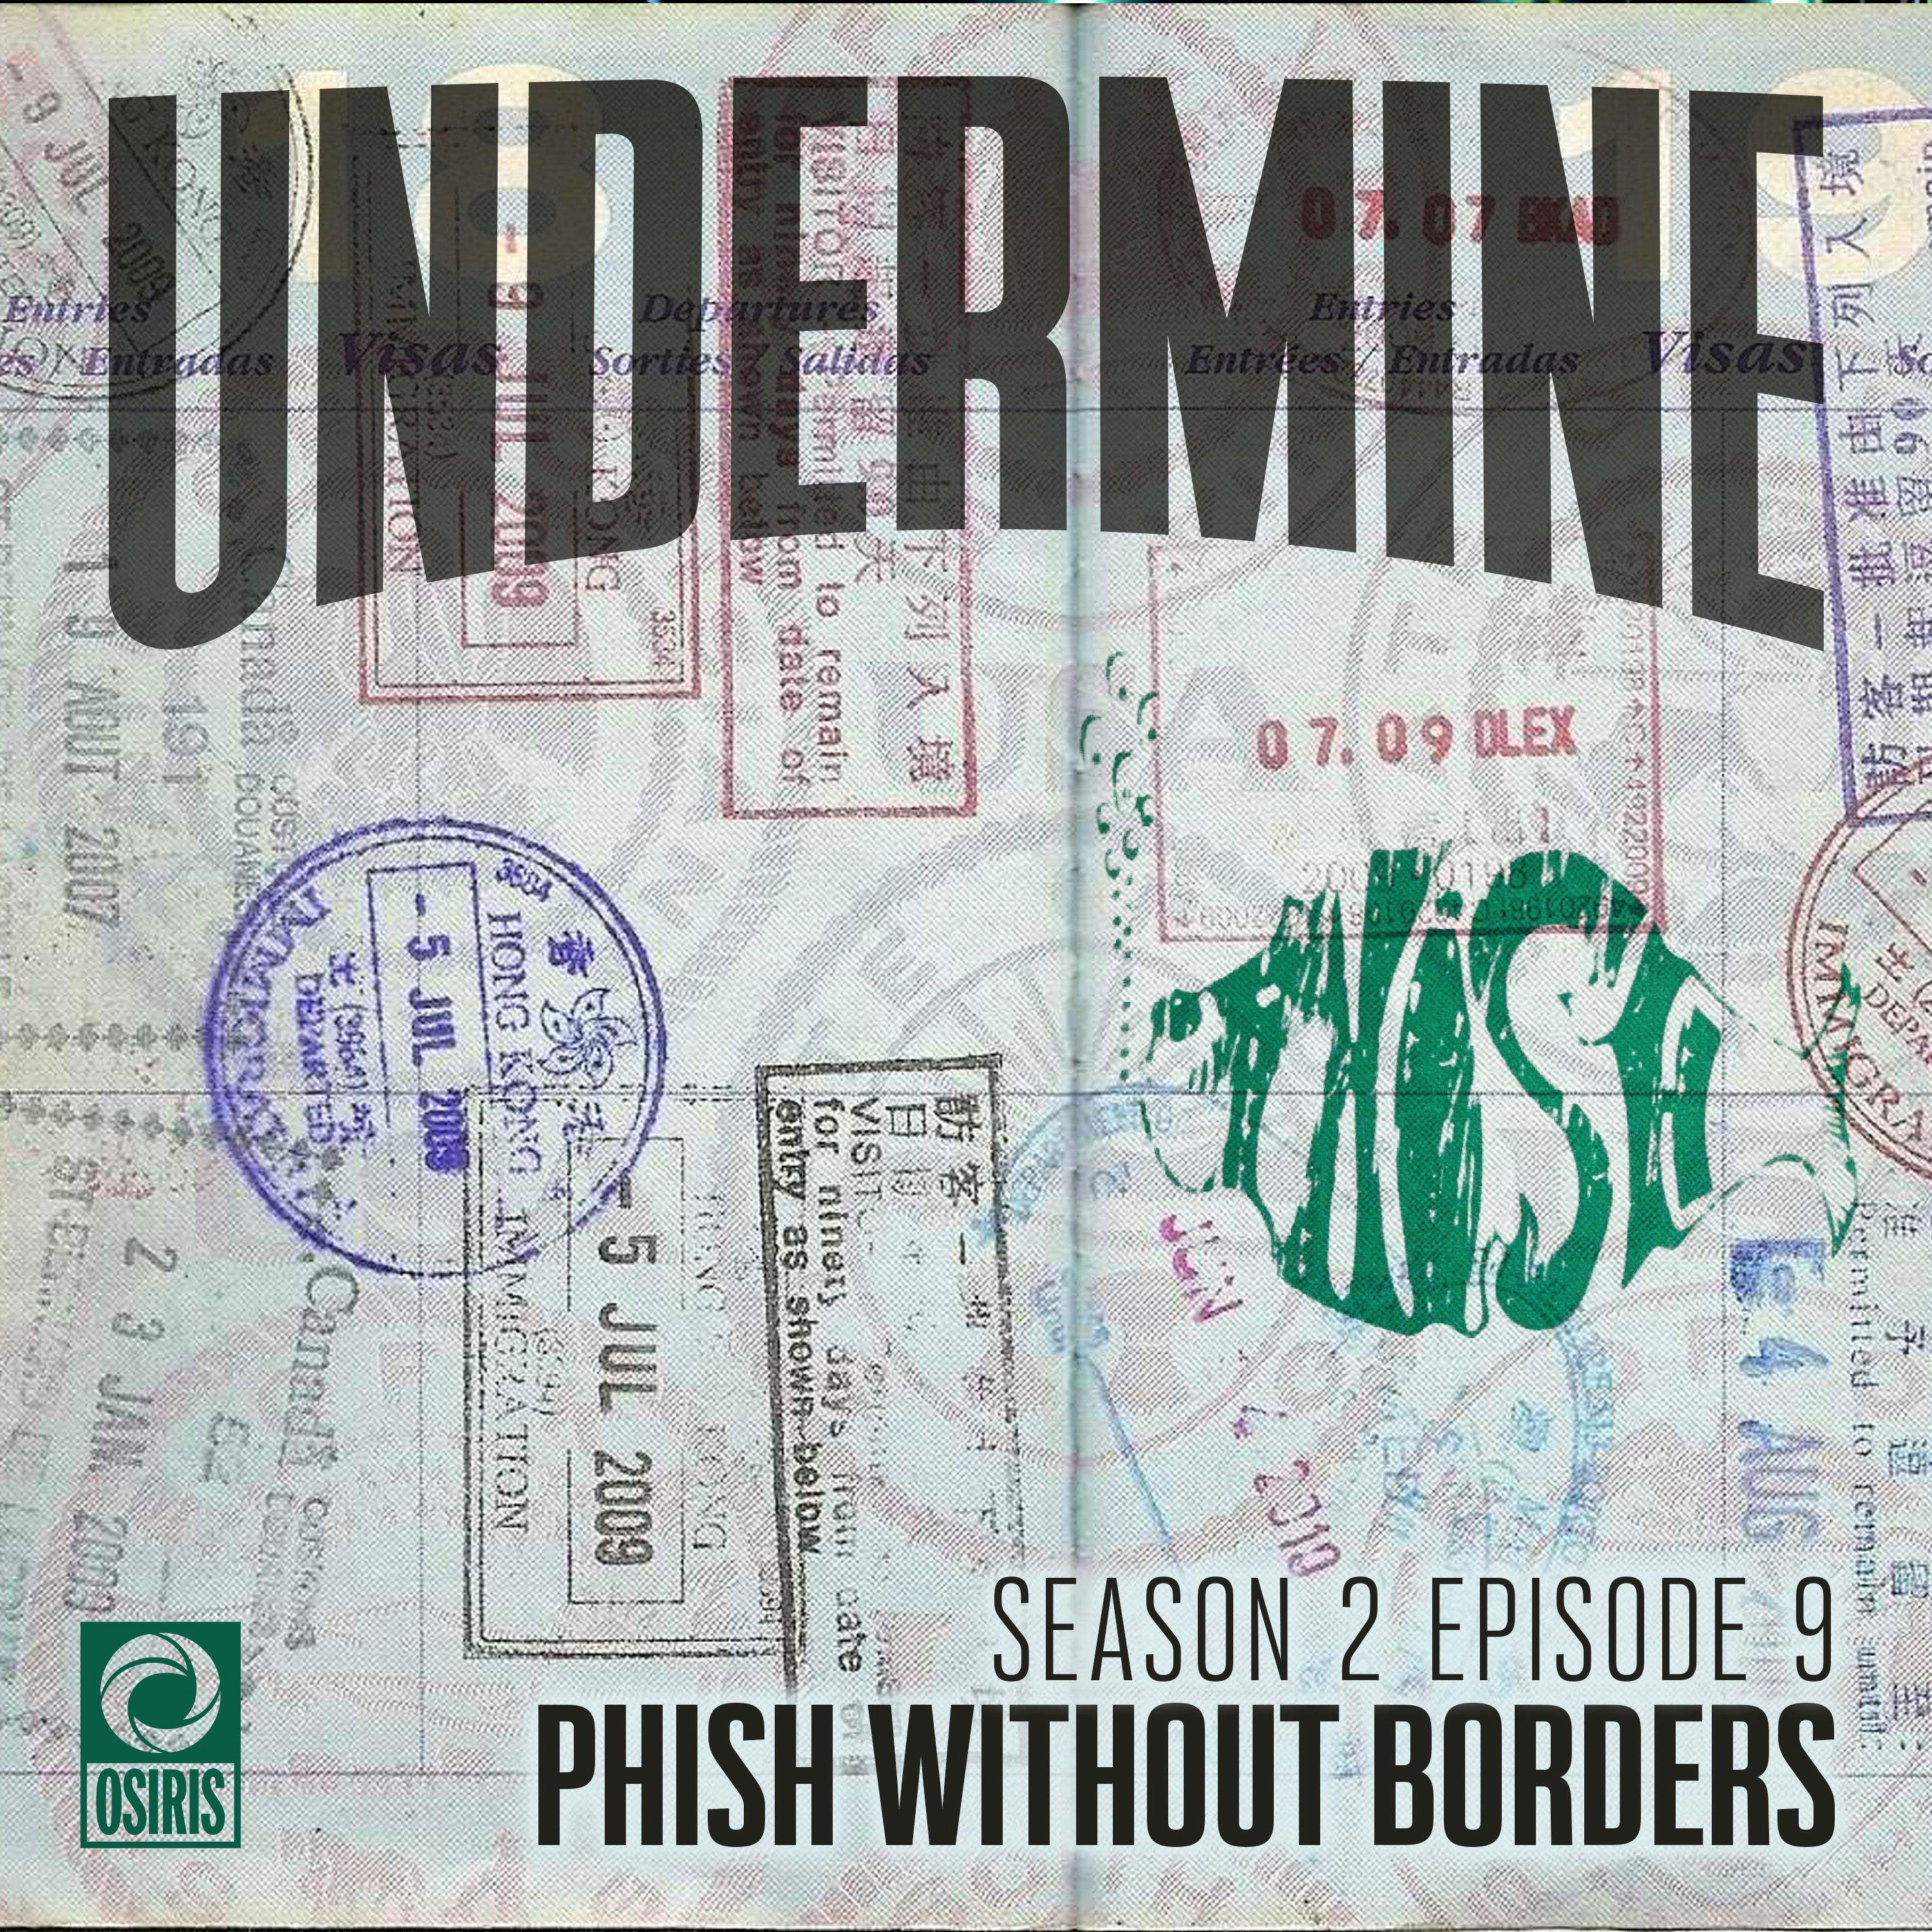 S2E9: Phish Without Borders